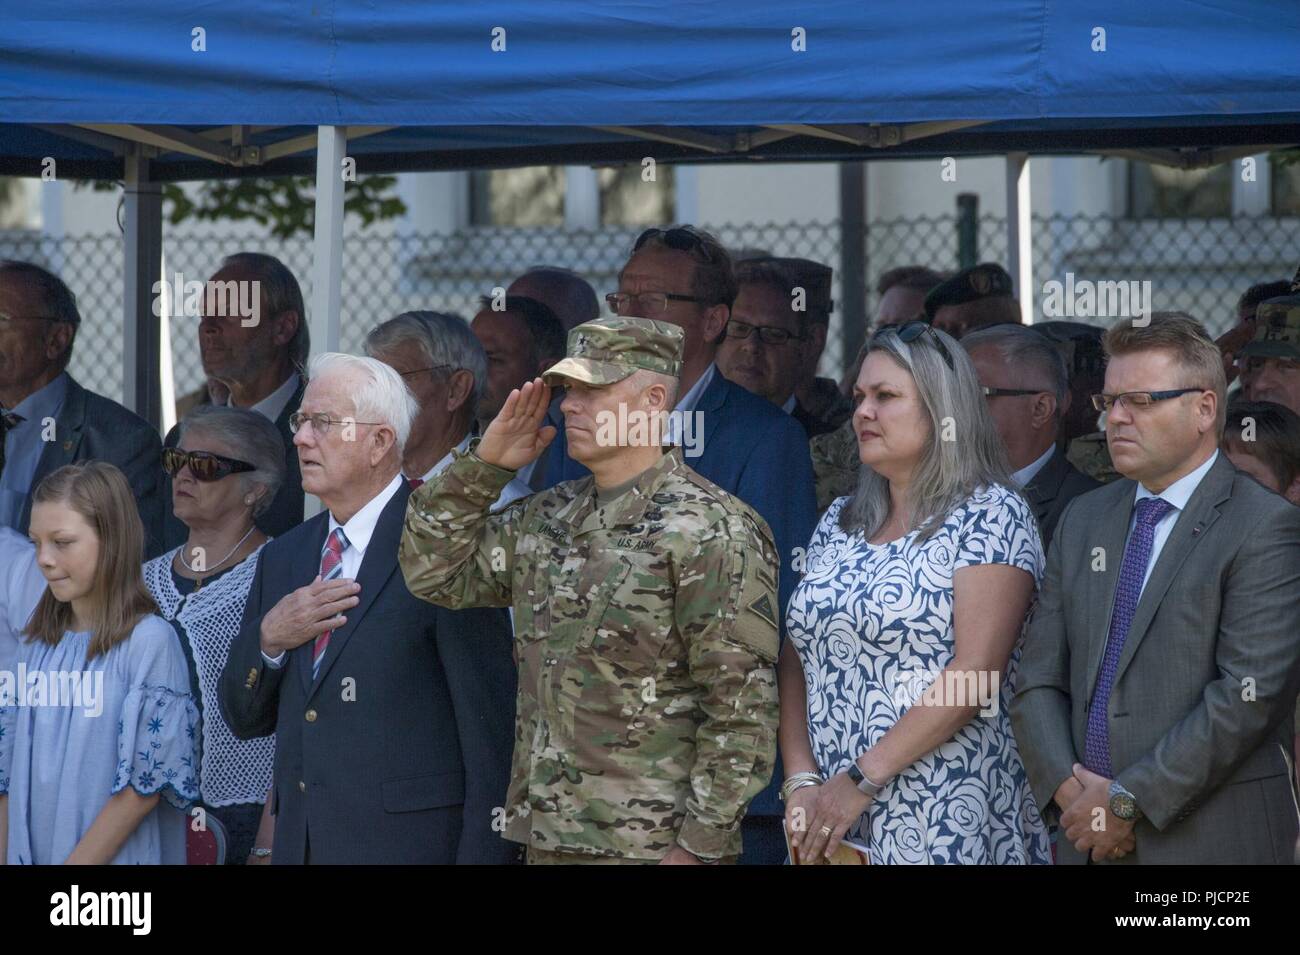 Ansbach, Germany -- U.S. Army Brig. Gen. Christopher C. Laneve, Commanding General of the 7th Army Training Command renders a salute during the United States Army Garrison (USAG) Ansbach Change of Command ceremony at Barton Barracks parade field, Ansbach, Germany, July 18, 2018. During the ceremony USAG Ansbach outgoing commander Col. Benjamin C. Jones relinquished command to incoming commander Col. Steven M. Pierce. Stock Photo